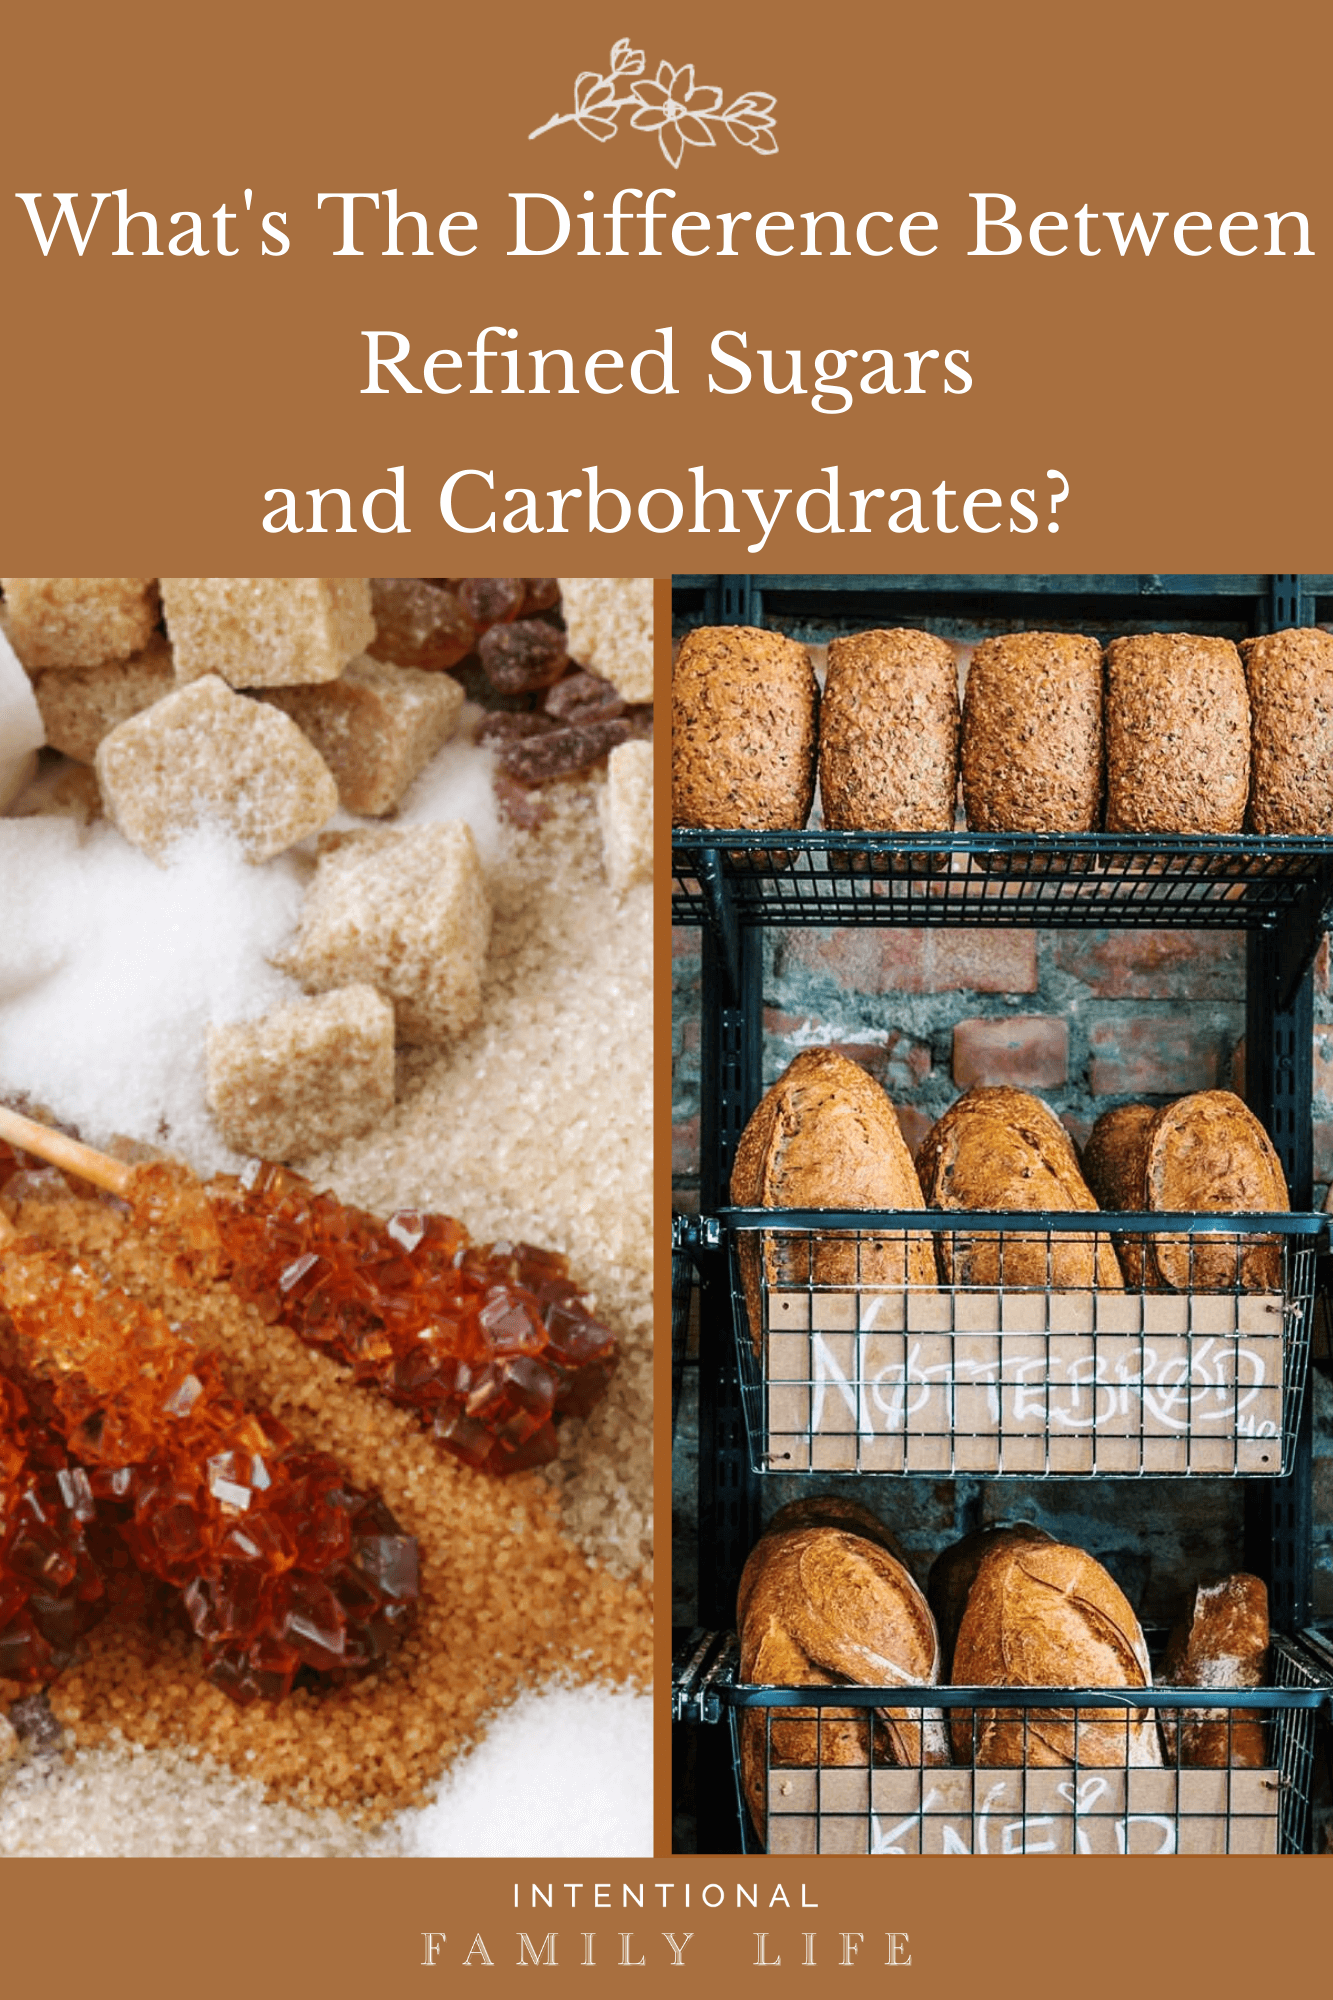 photo on left of various refined sugars and photo of freshly baked bread on bakery racks